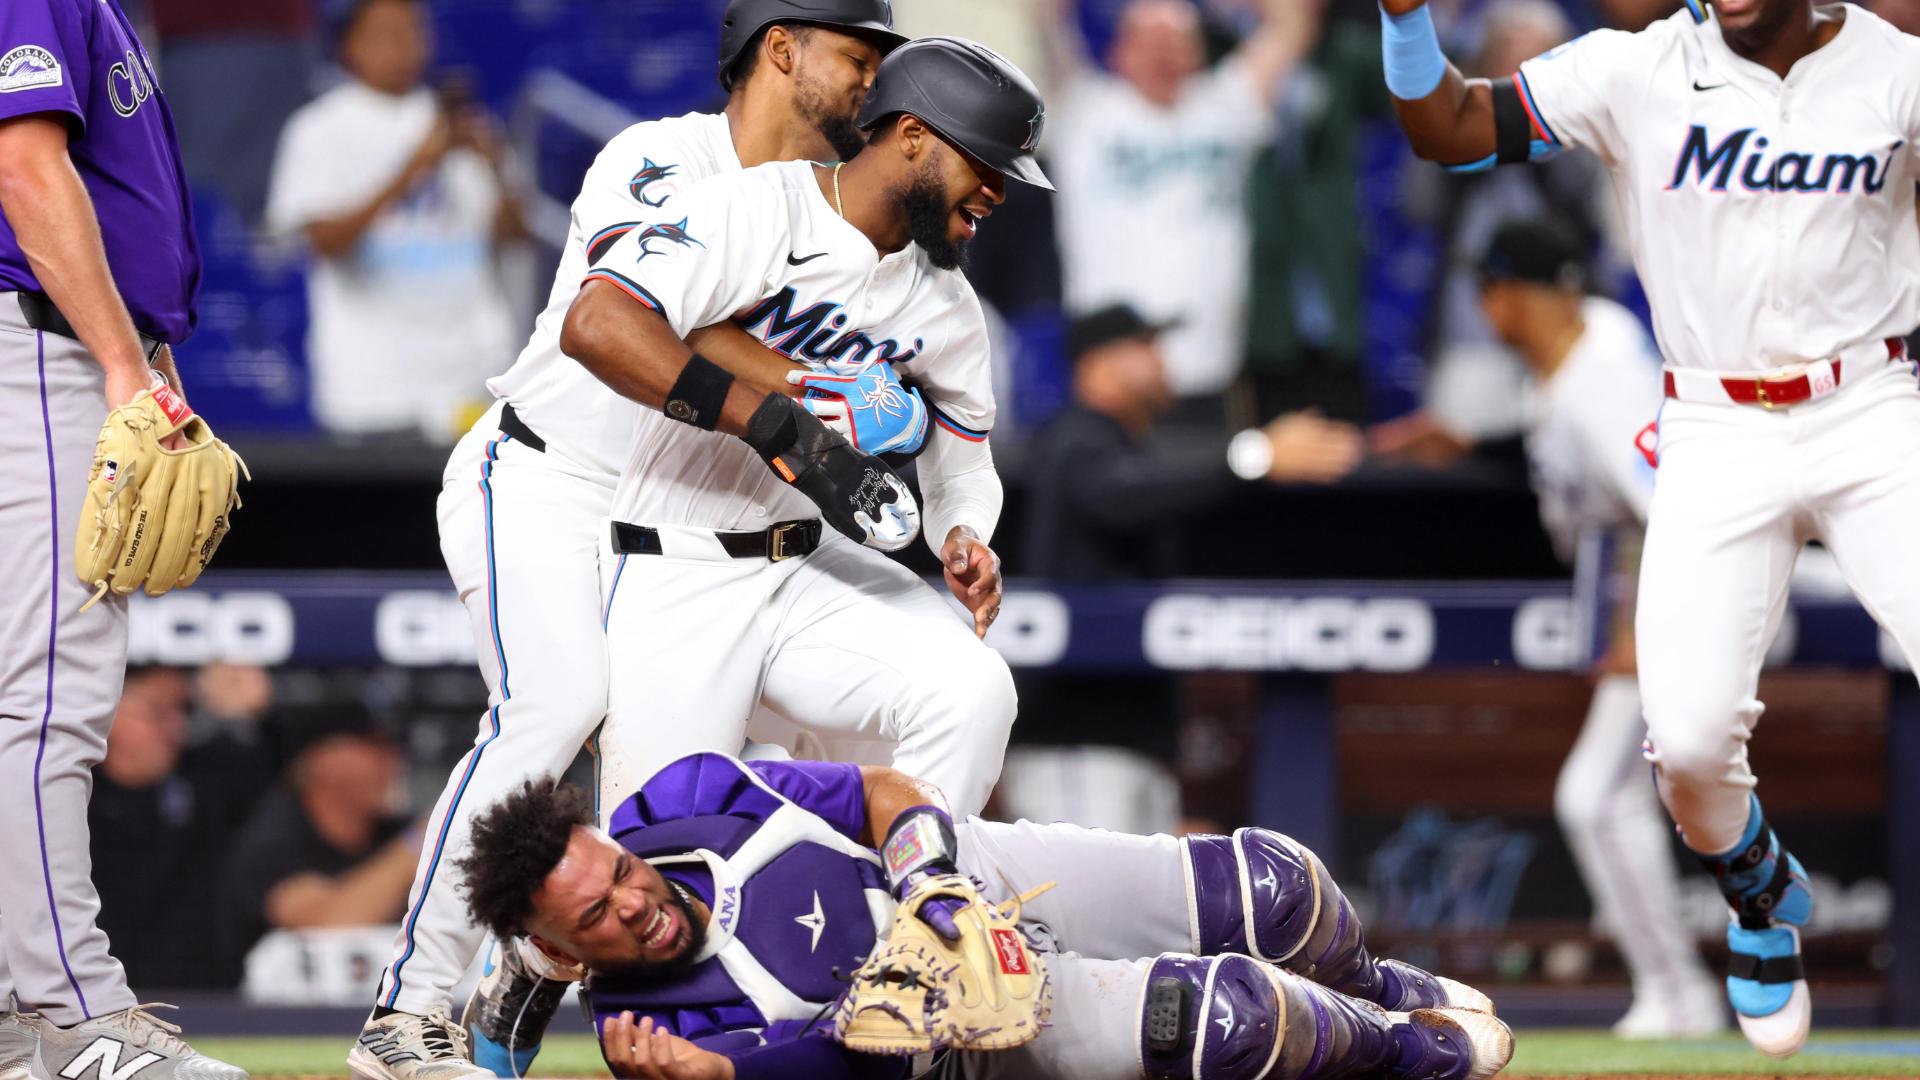 Rockies become first to team to trail in opening 29 games  waste 5-run lead in 7-6 loss to Marlins